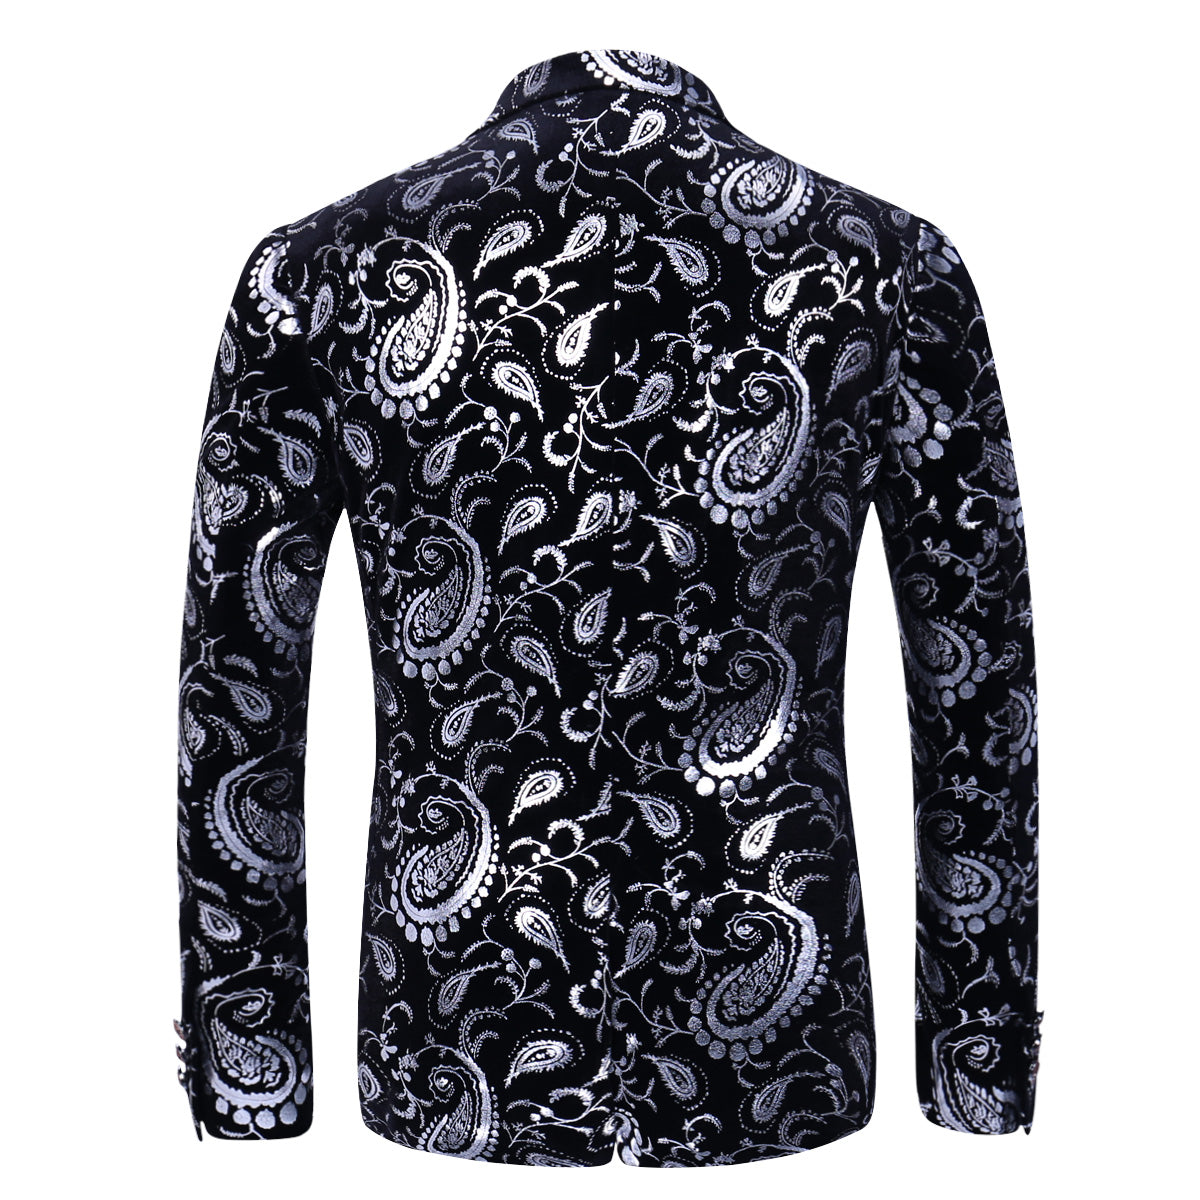 Men's Casual Slim Fit Blazer Shiny Printed Jacket Silver And Black